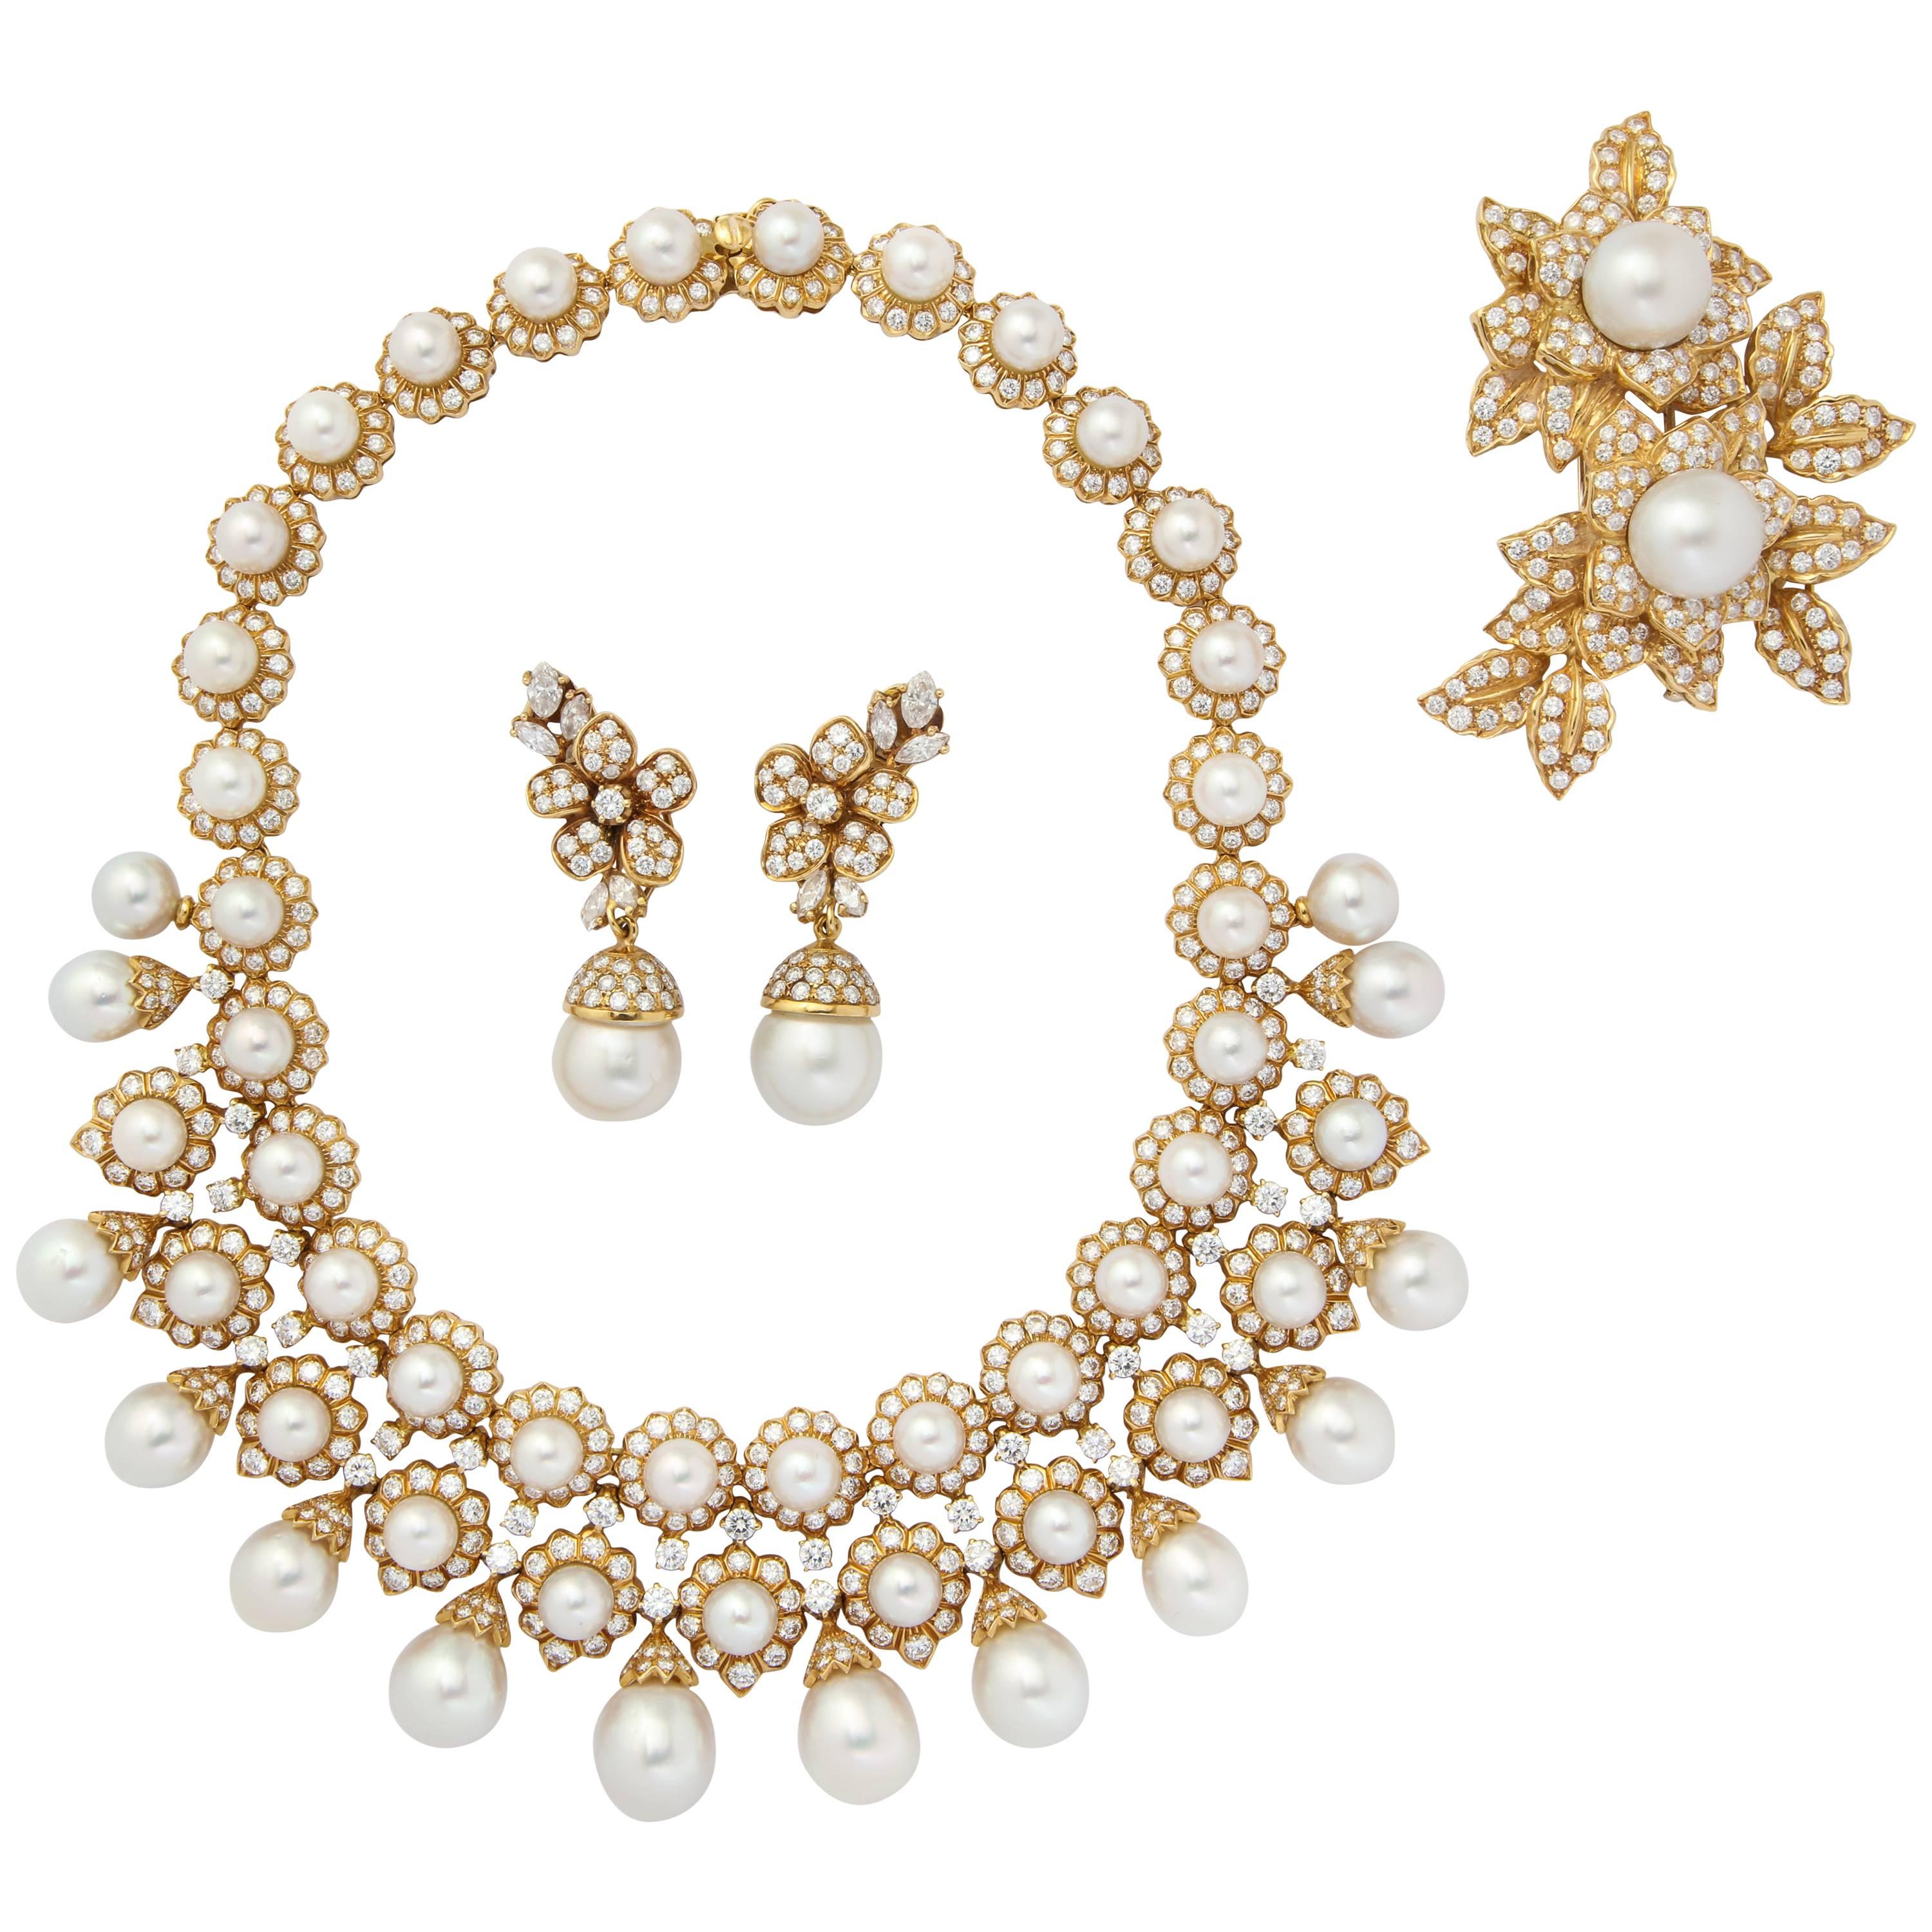 Impressive Diamond Cultured Pearl Gold Necklace Earrings Pin Set